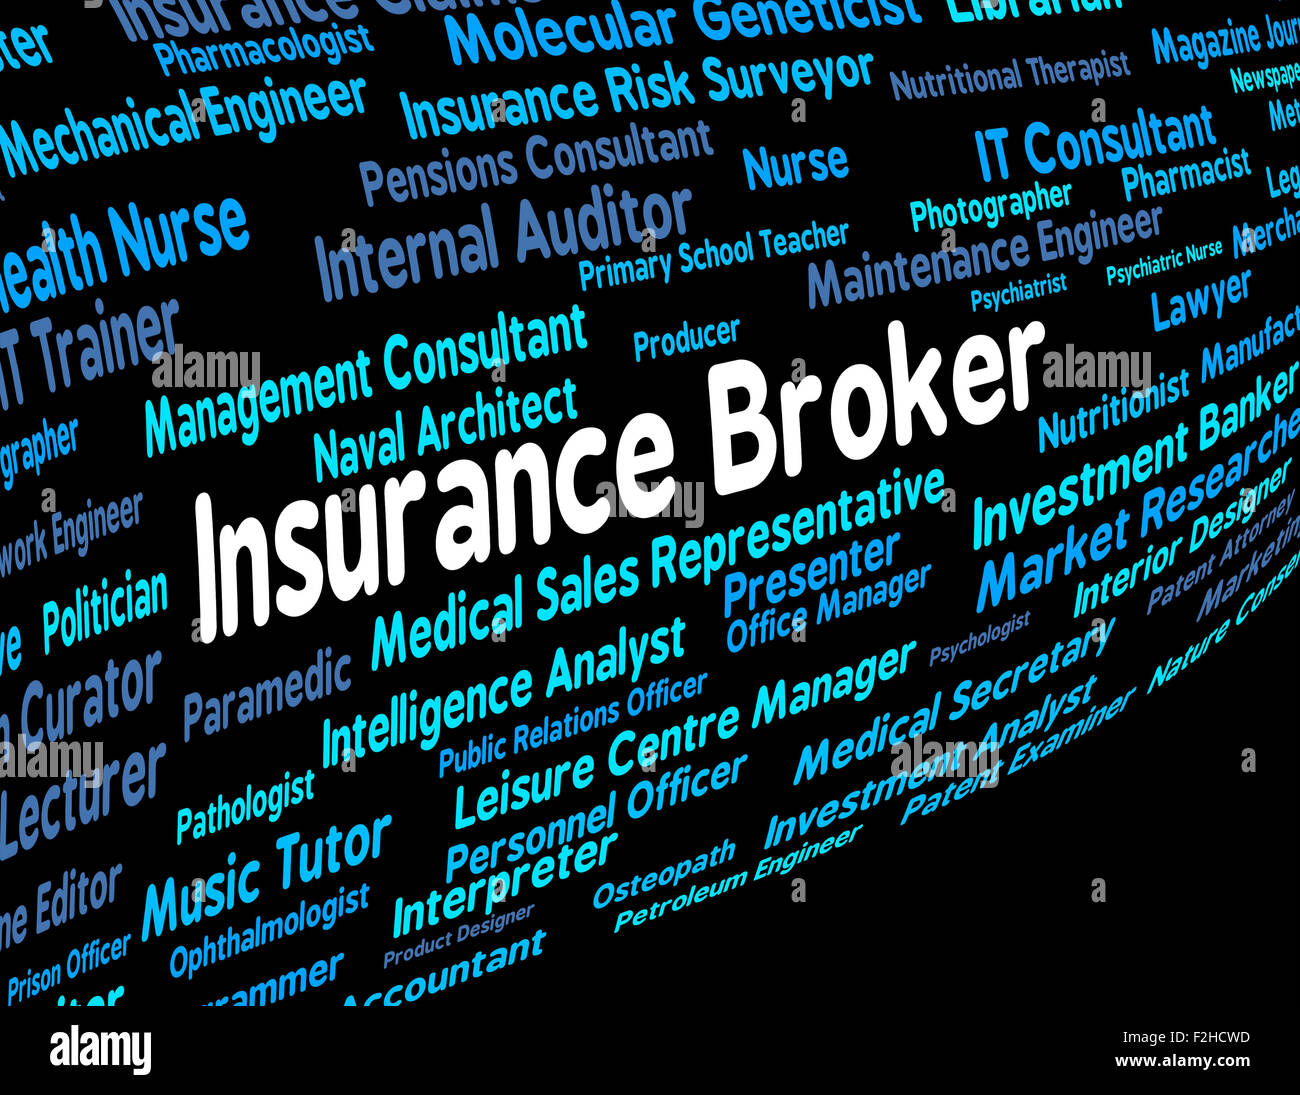 stock broker indemnity policy